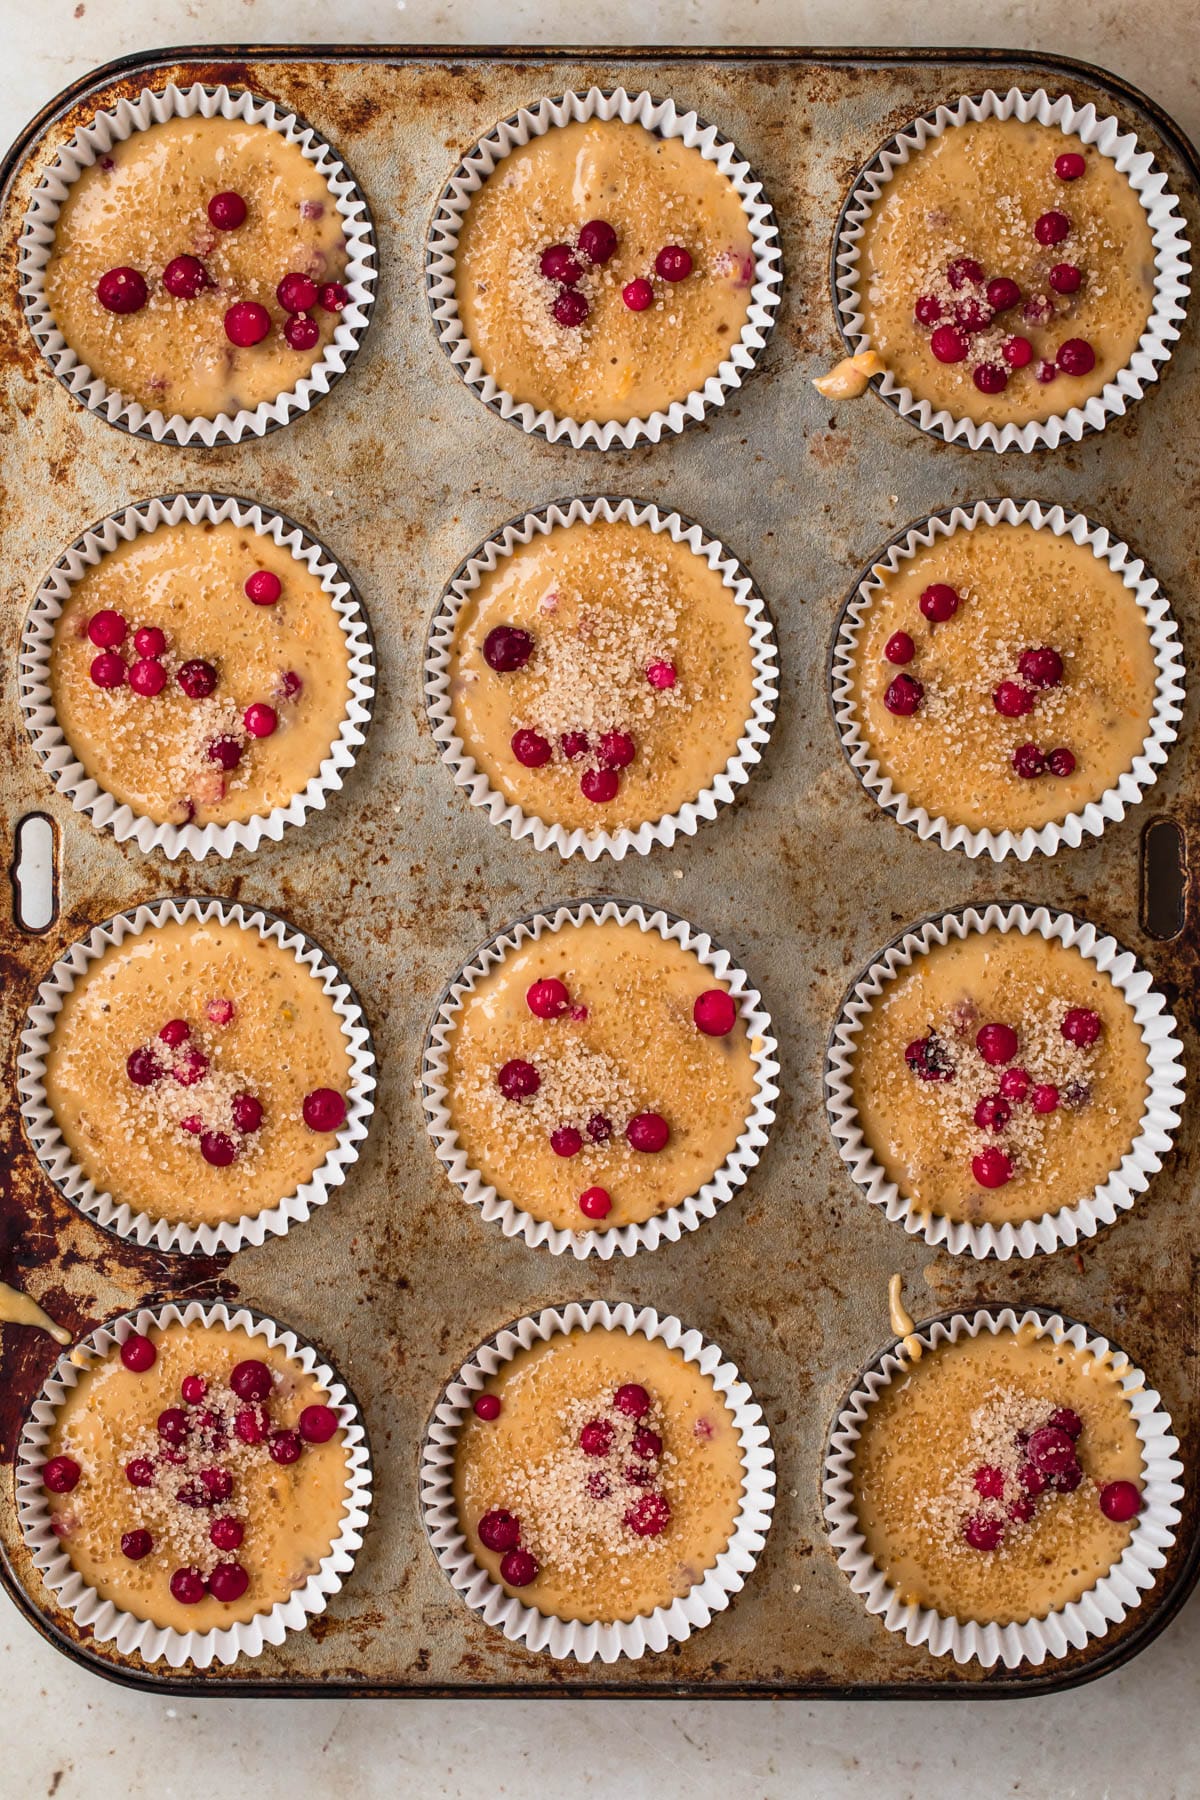 Orange cranberry muffin batter evenly scooped into cupcake papers, topped with extra cranberries and raw sugar.